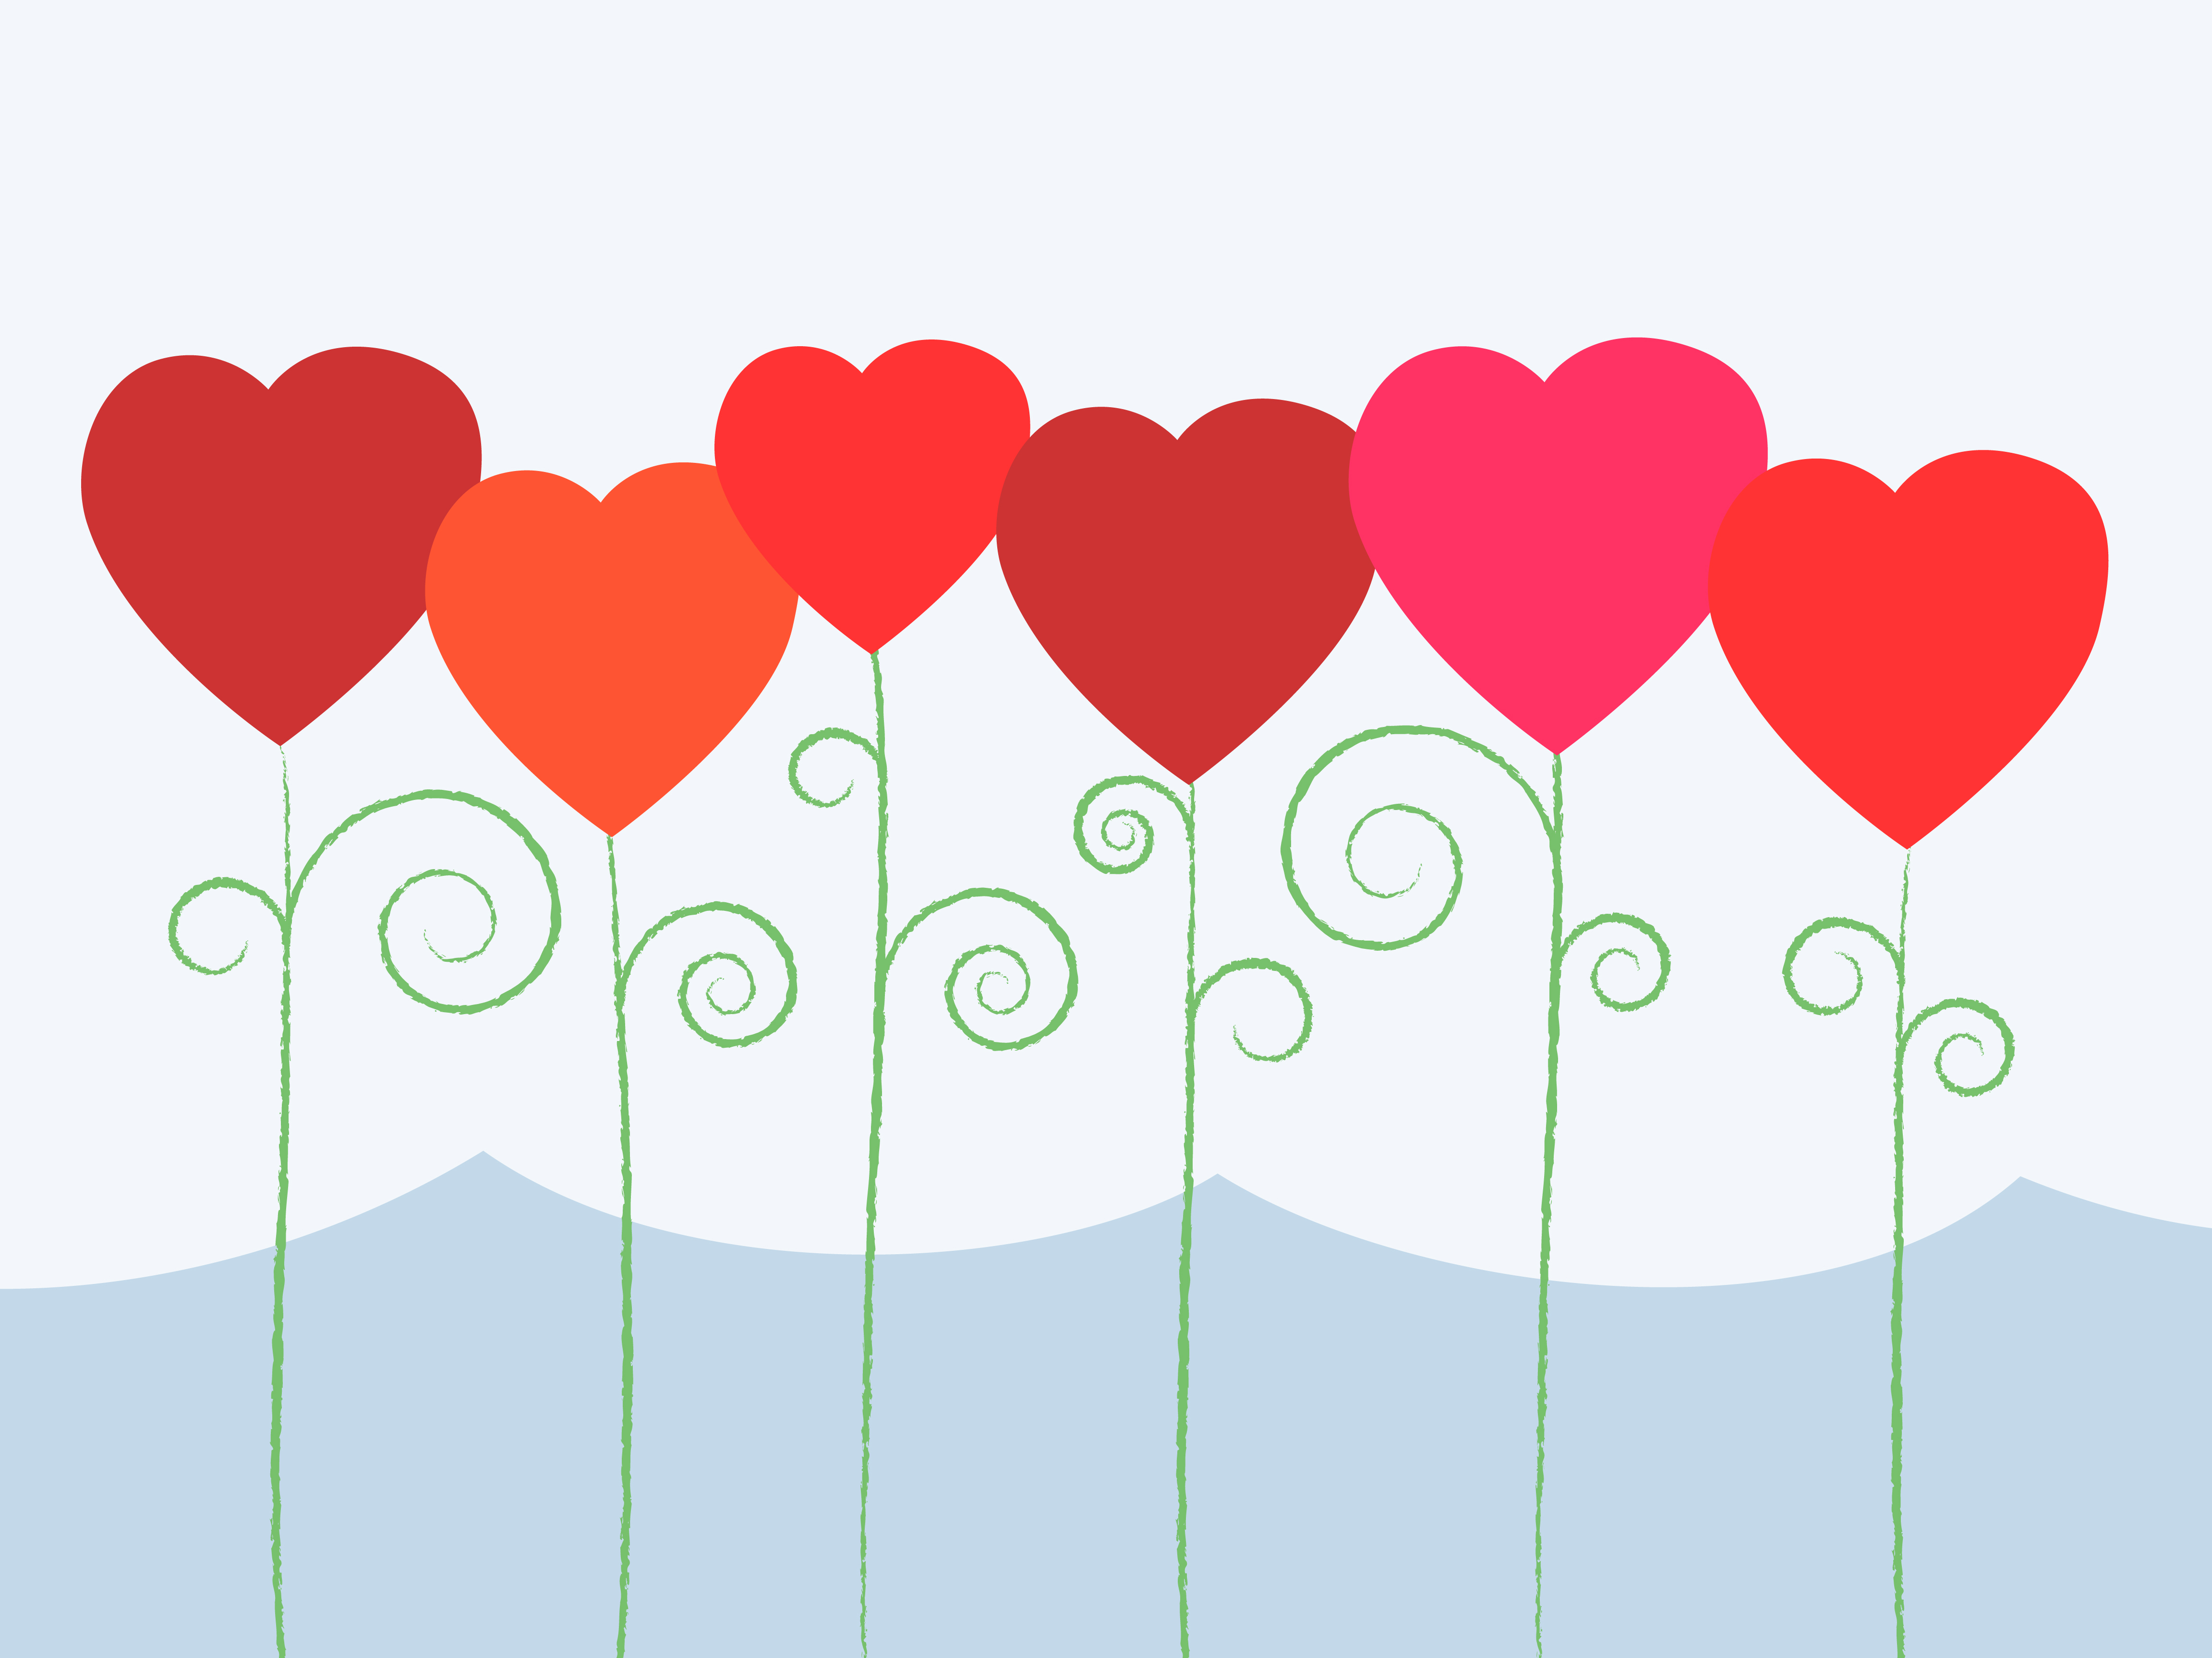 Illustration of hearts in various shades of red on long green stems against a simple background of a blue sky and white cloud